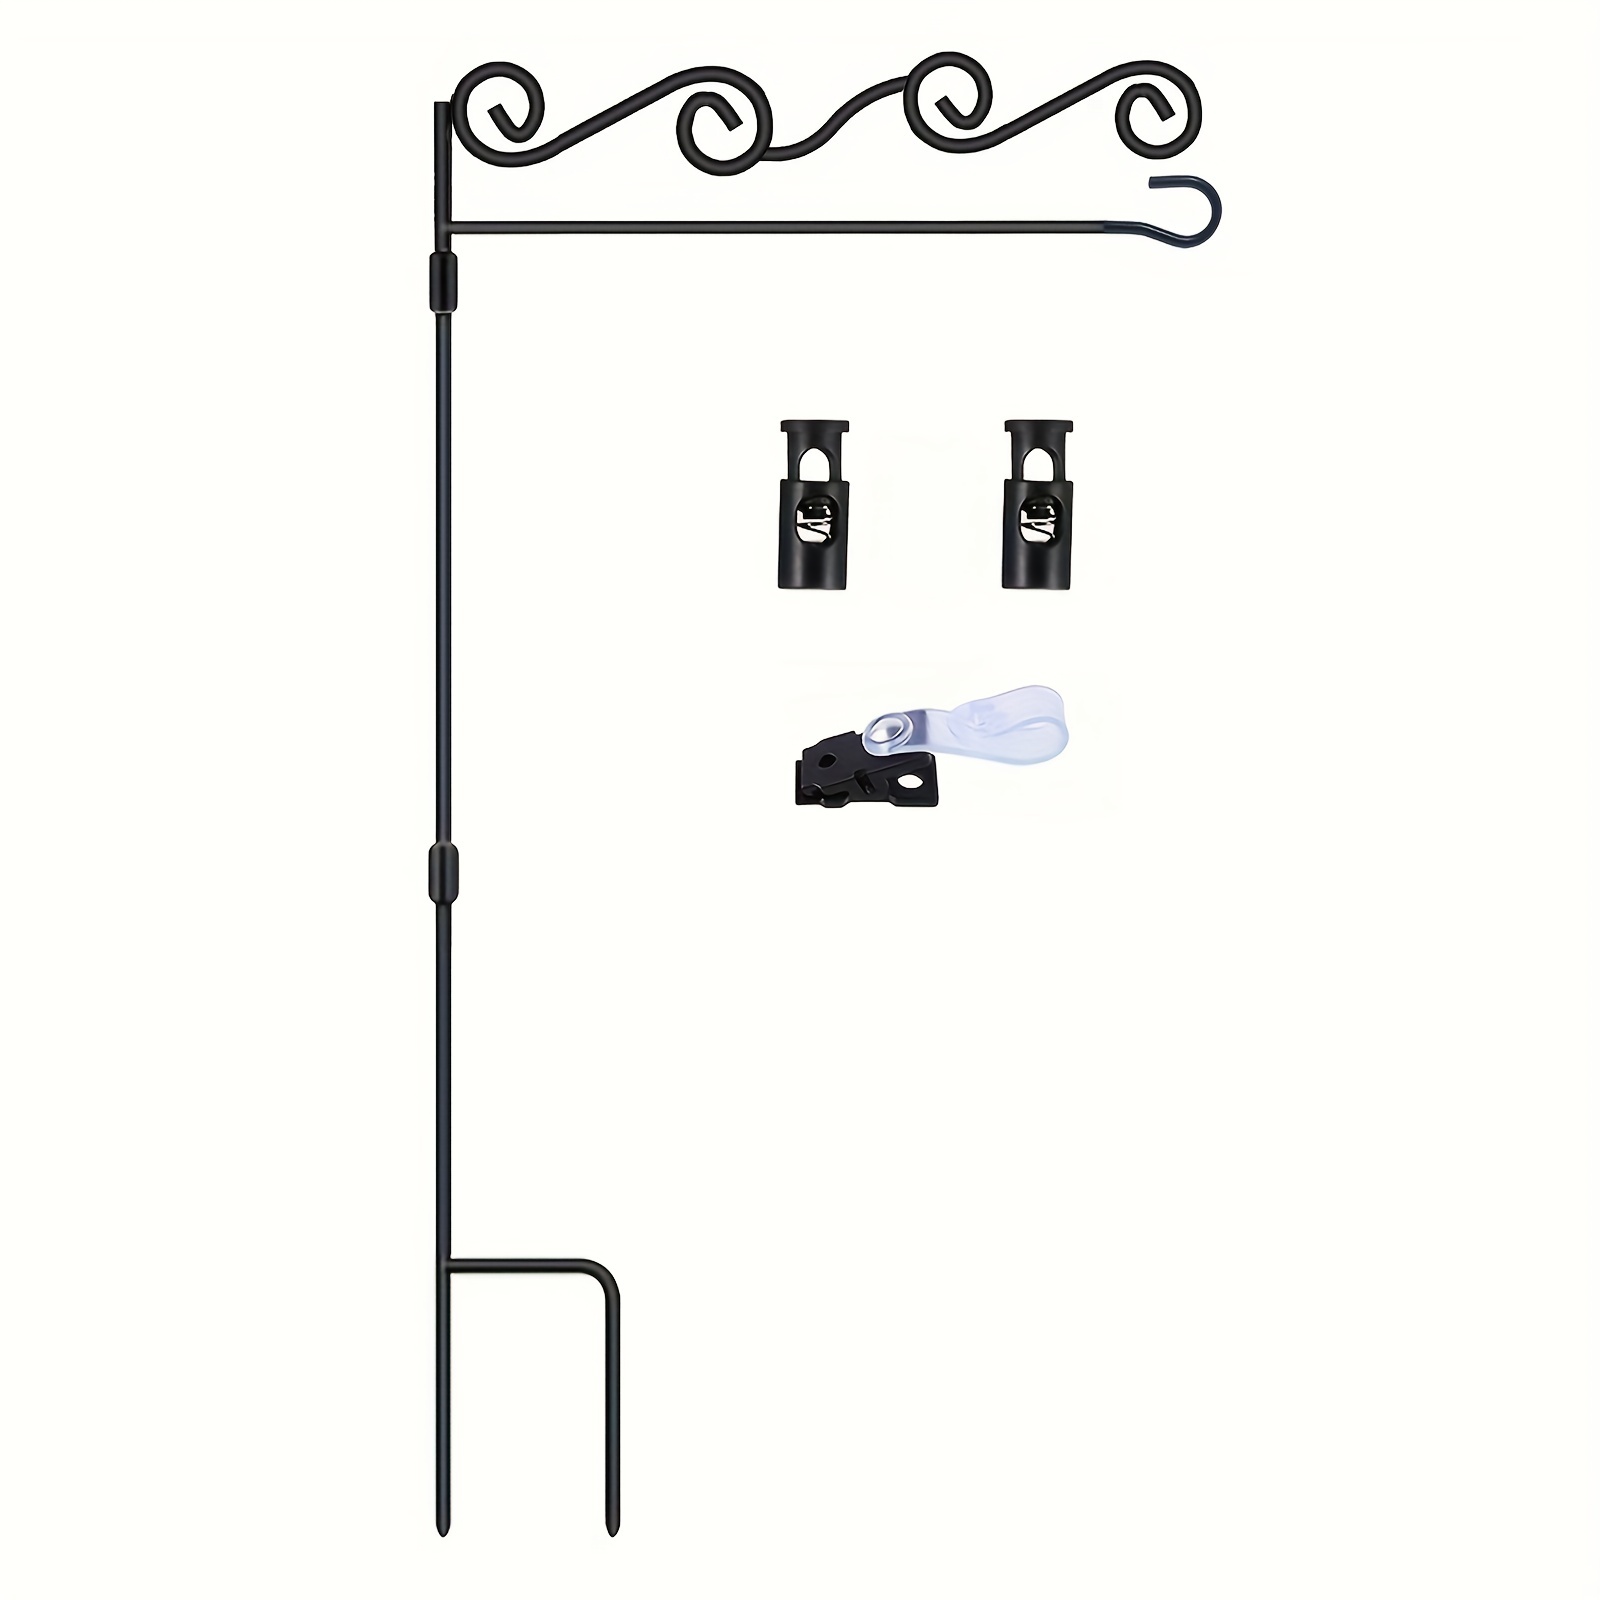 

1pc Garden Flag Holder Stand Pole, Stylish Garden Yard Flag Pole Stands, Powder Coated Weather Resistant With Sprint Stoppers & Windproof Clips For Garden Lawn